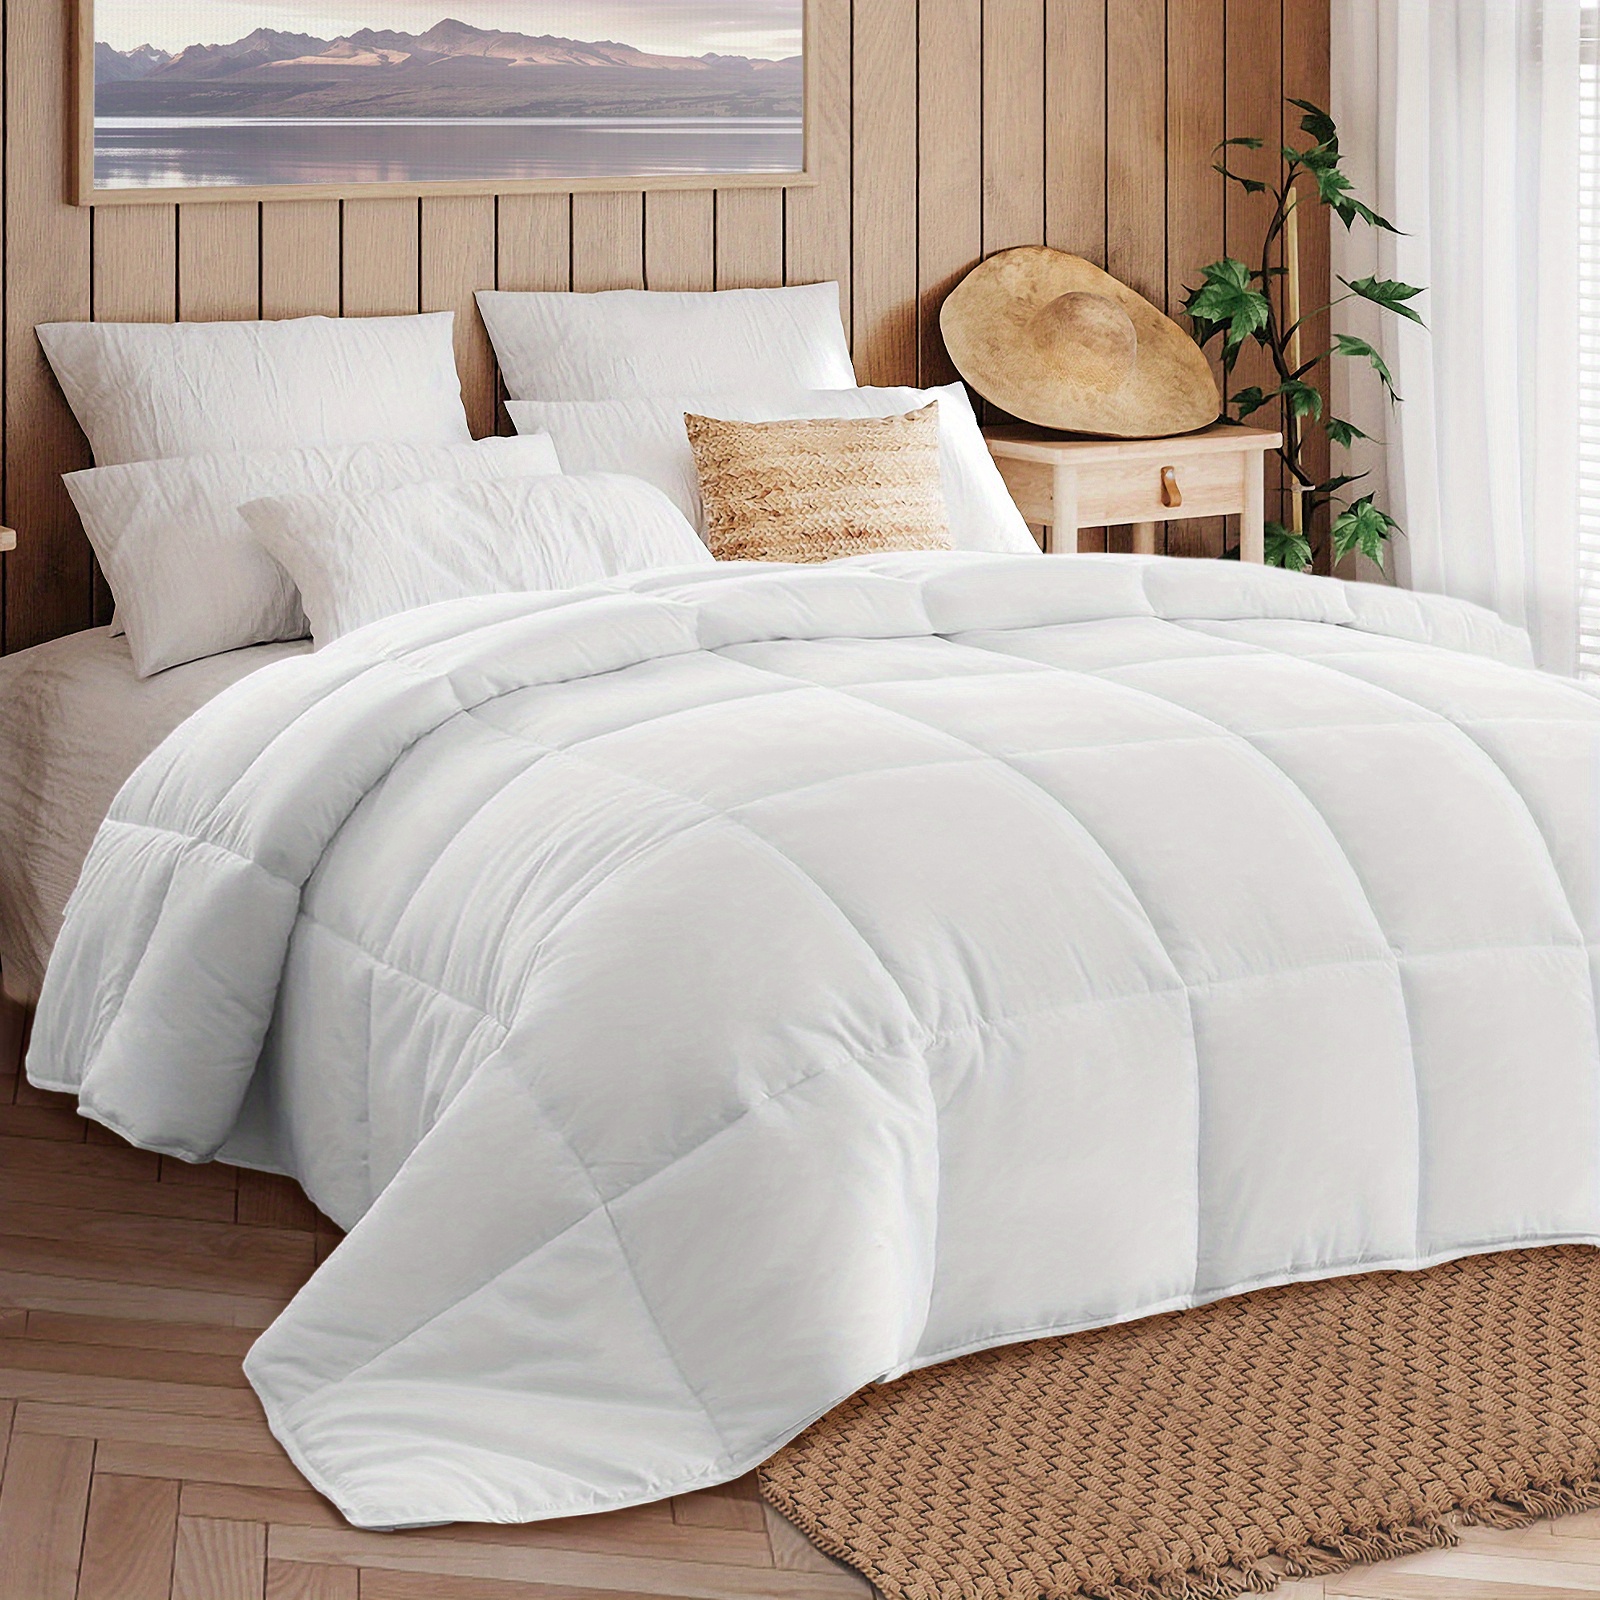 

Outdoor/indoor Bedding Comforter Quilted, Oversized For Cold Weather, Warm, Soft, Portable, Camping, Indoor